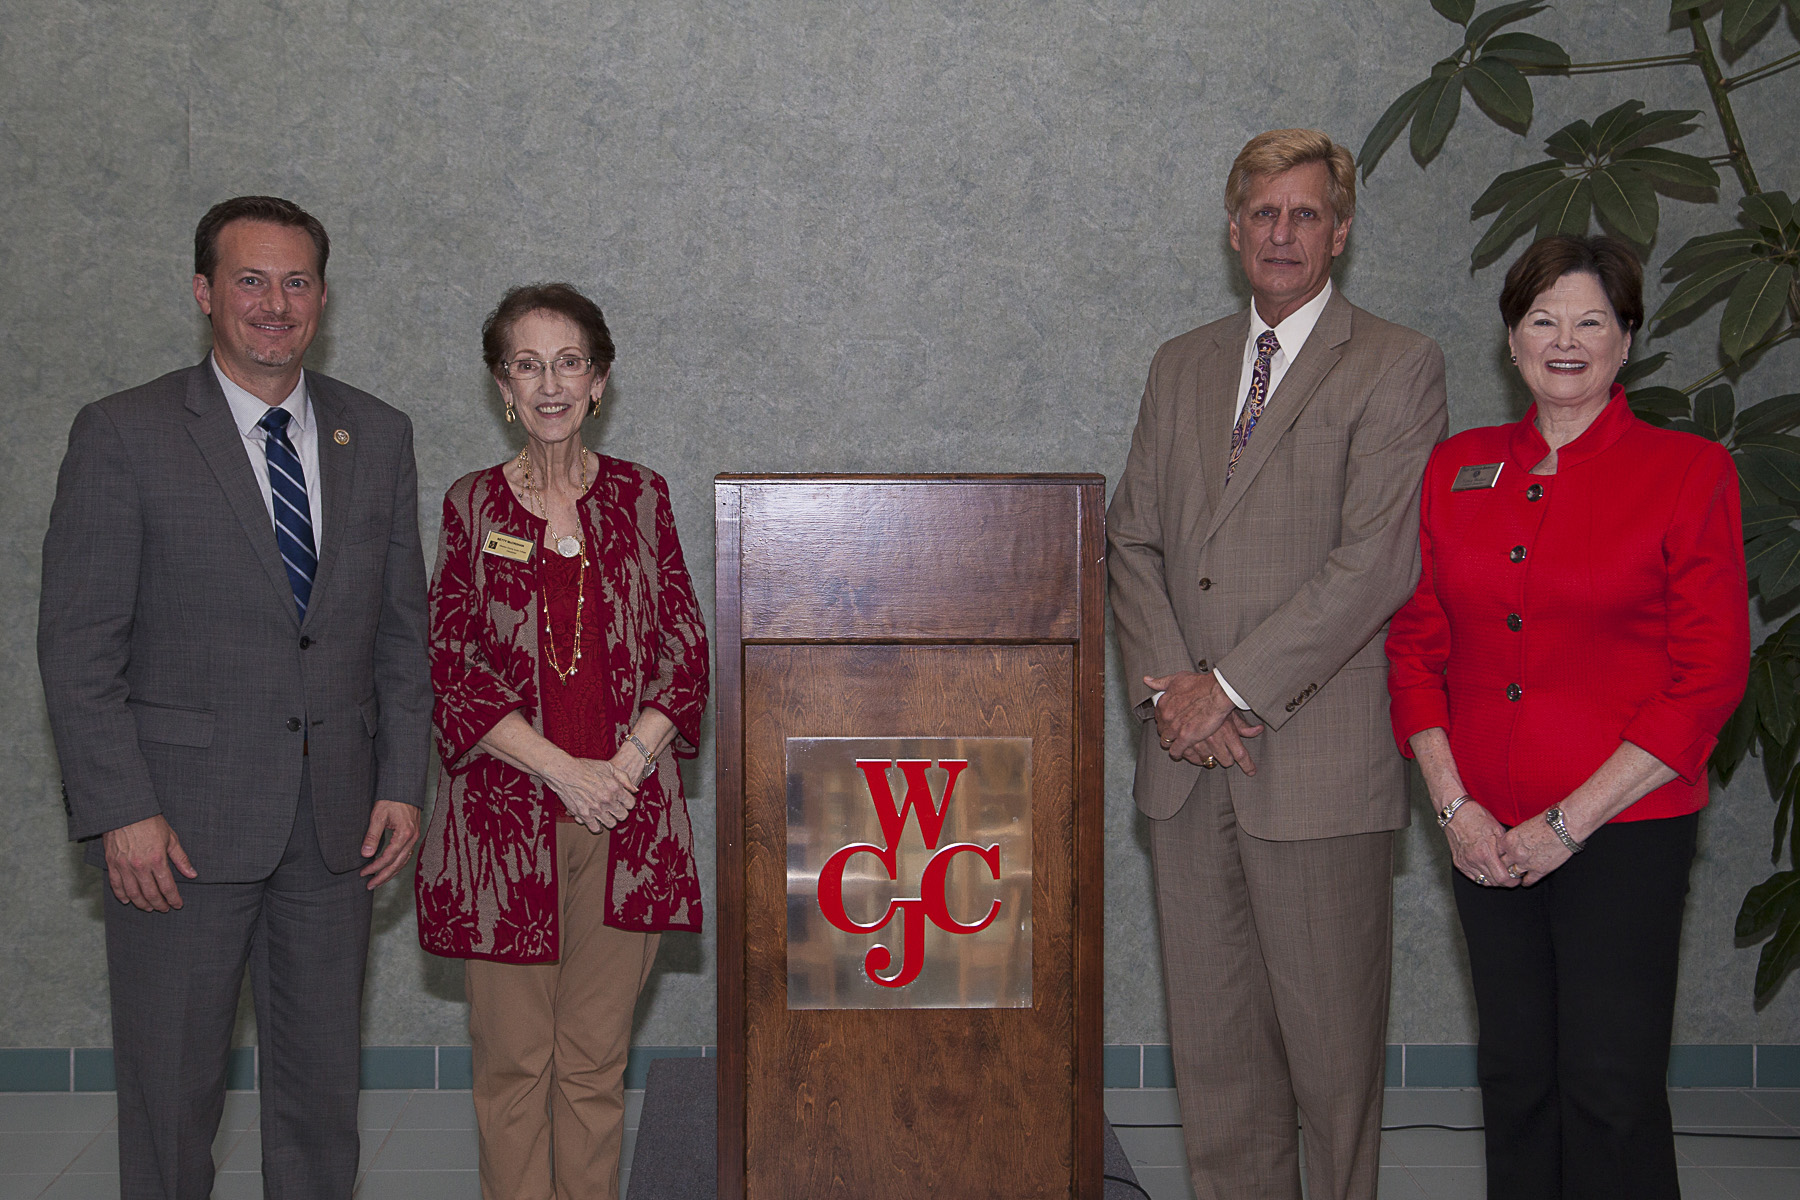 ONGOING SUPPORT - WCJC event recognizes legislators for support of education